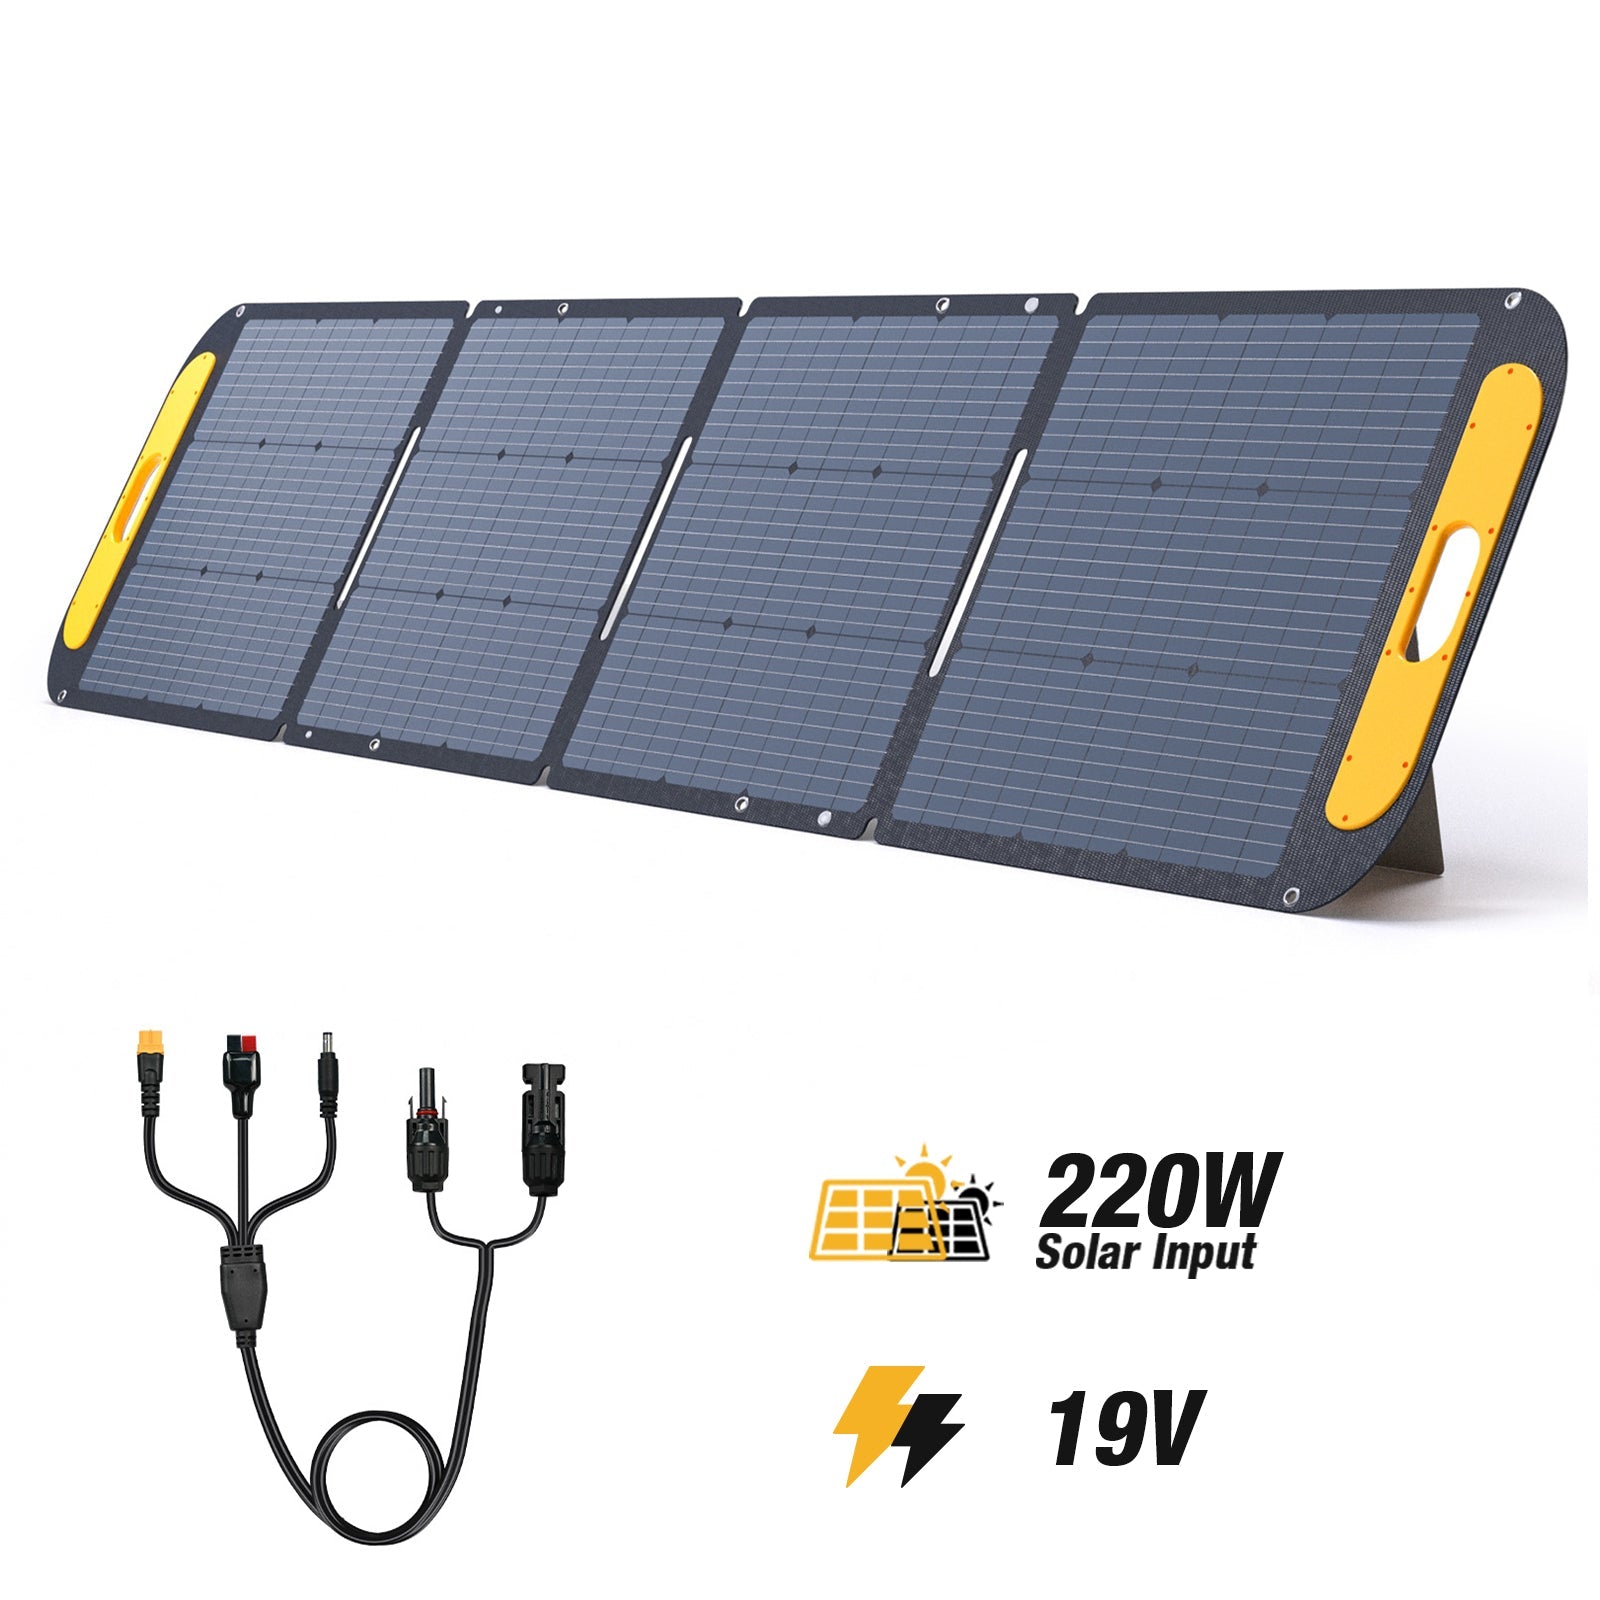 Jump 1000W/ 4504Wh 220W Solargenerator